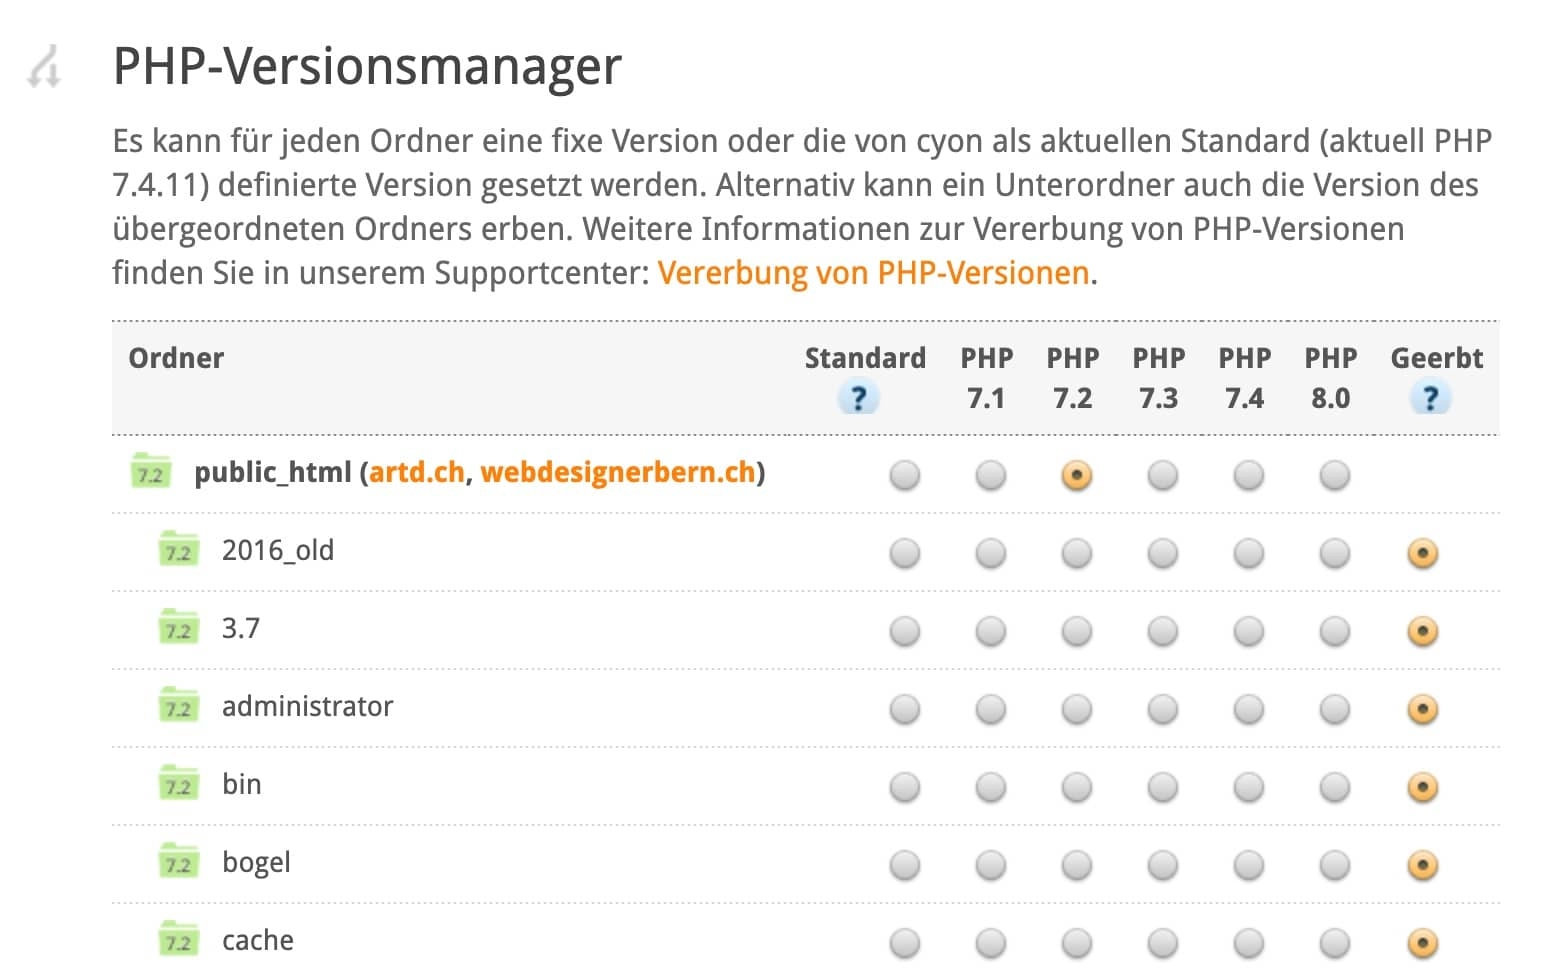 PHP Versionsmanager in Cyon